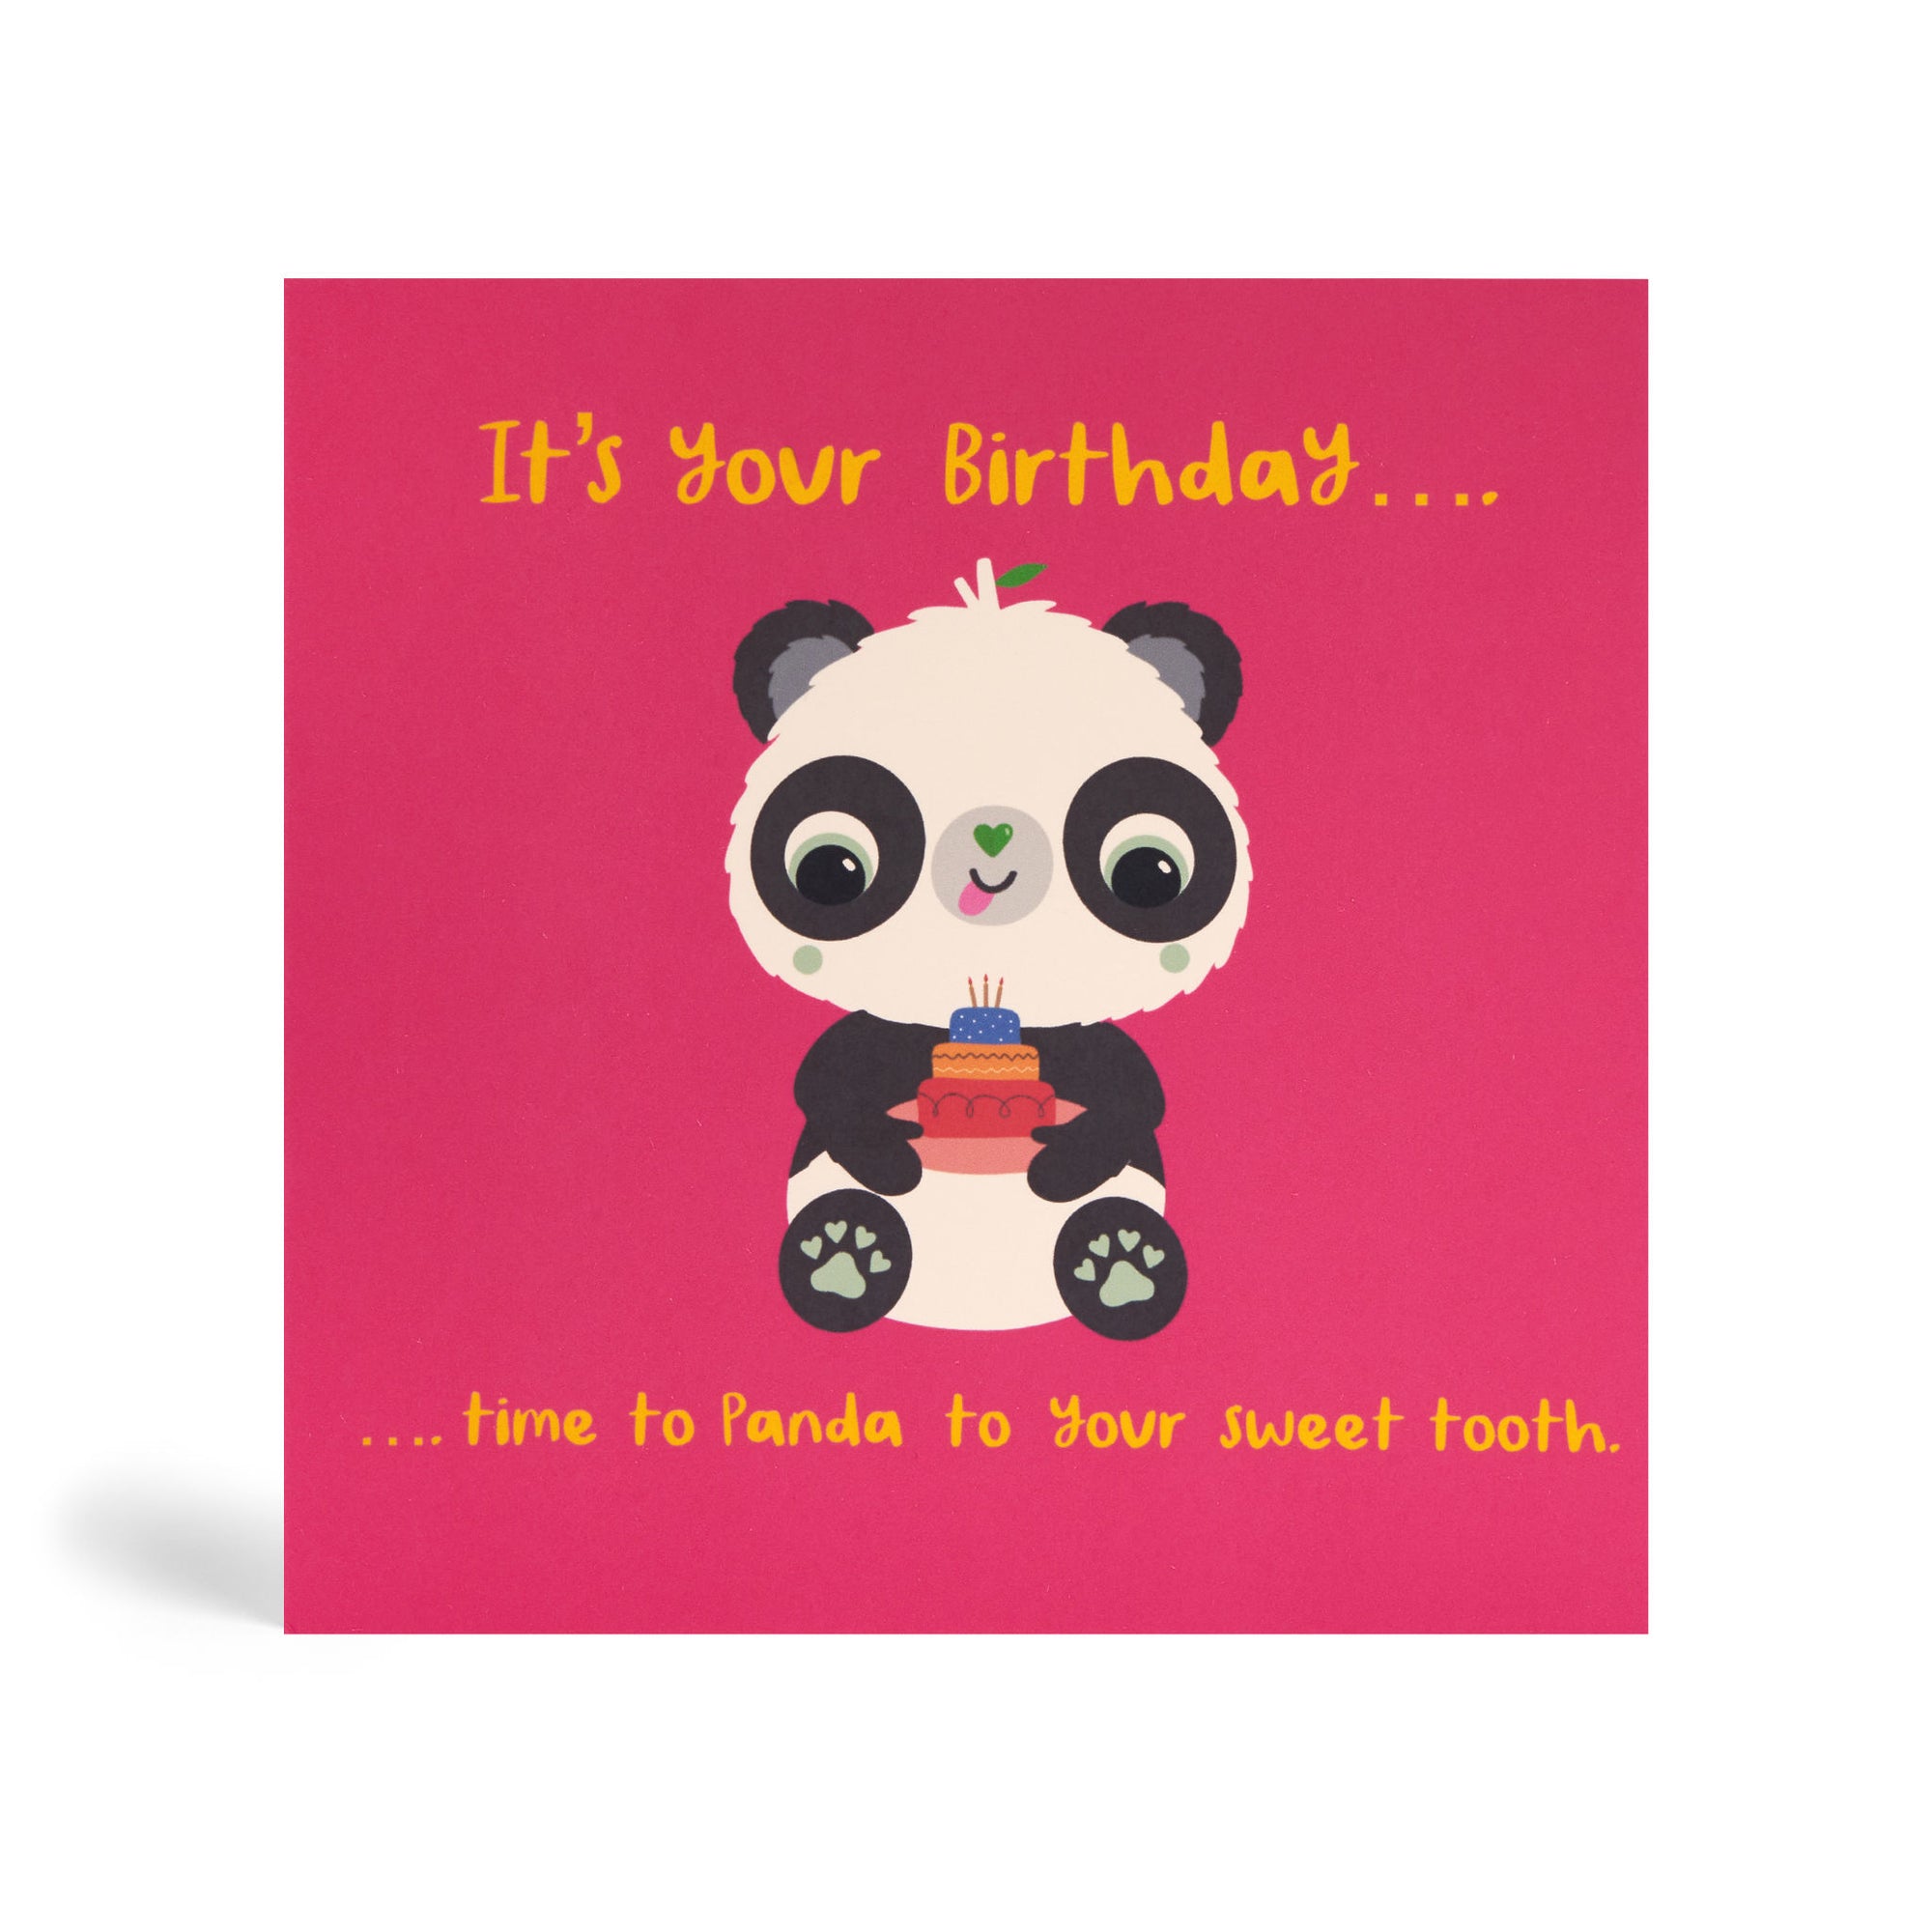 150mm square pink eco-friendly, tree free, birthday greeting card showing Panda sitting and offering a yummy birthday cake. The card says, It’s your Birthday….. Time to Panda to your sweet tooth.